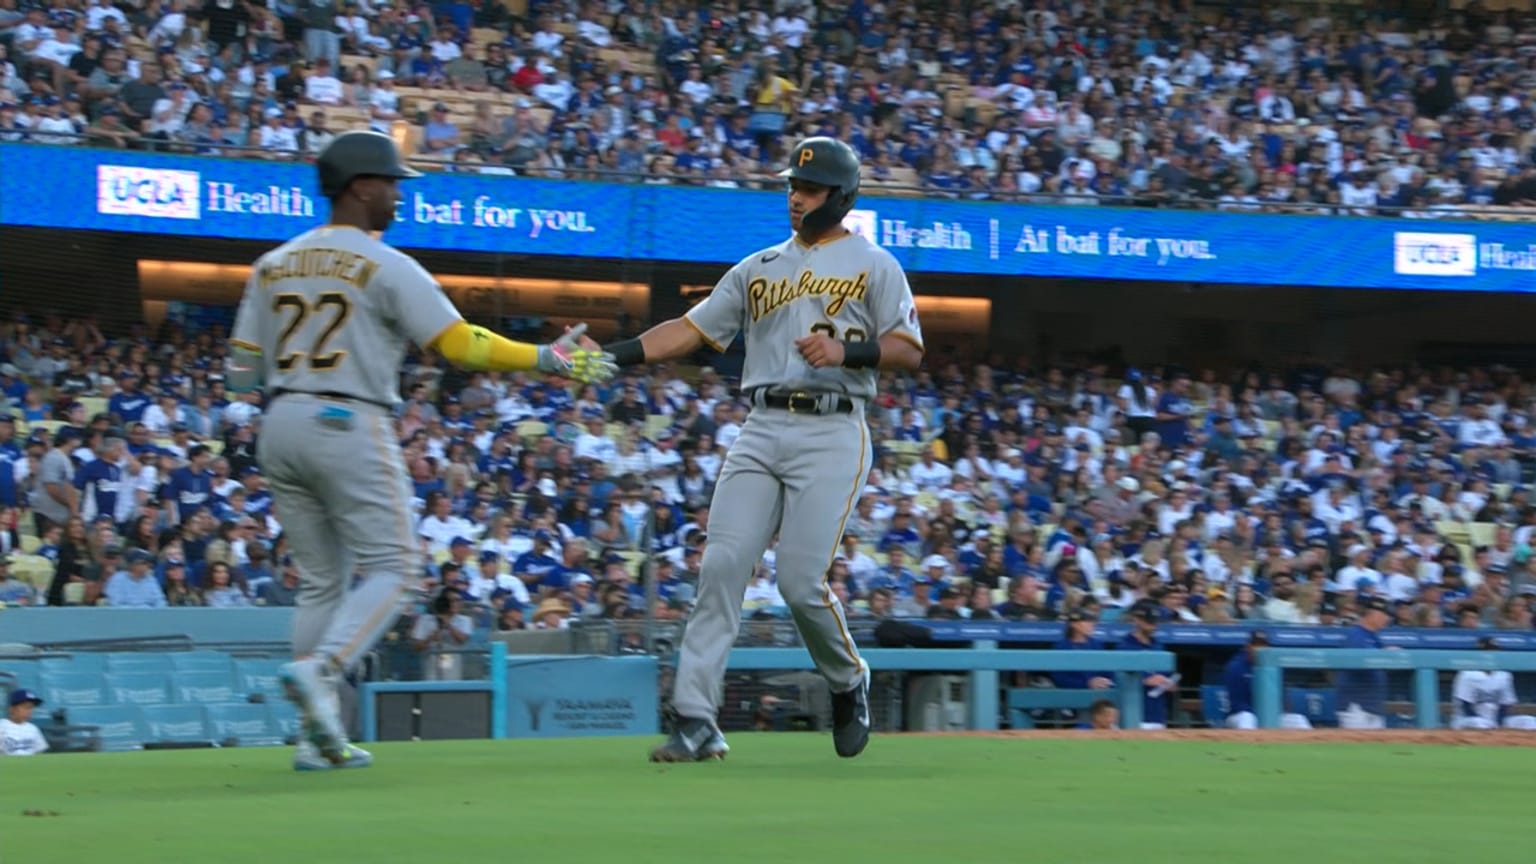 Pirates take series over Brewers in throwback uniforms